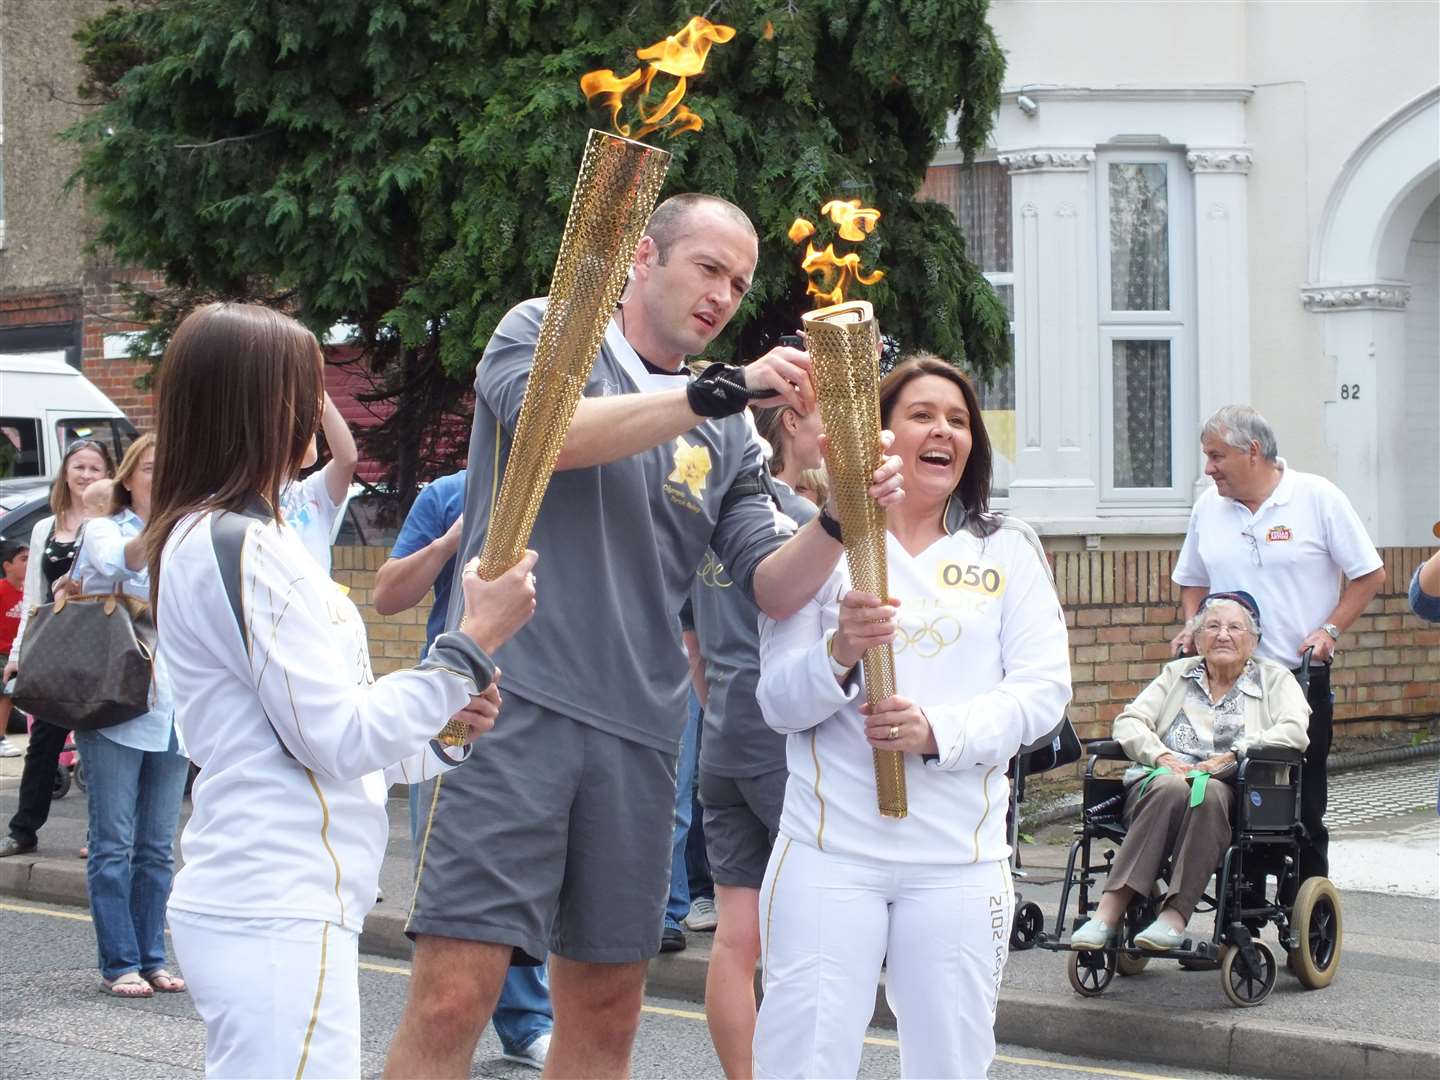 The Olympic Torch Relay took the flame around the world ahead of its arrival in London